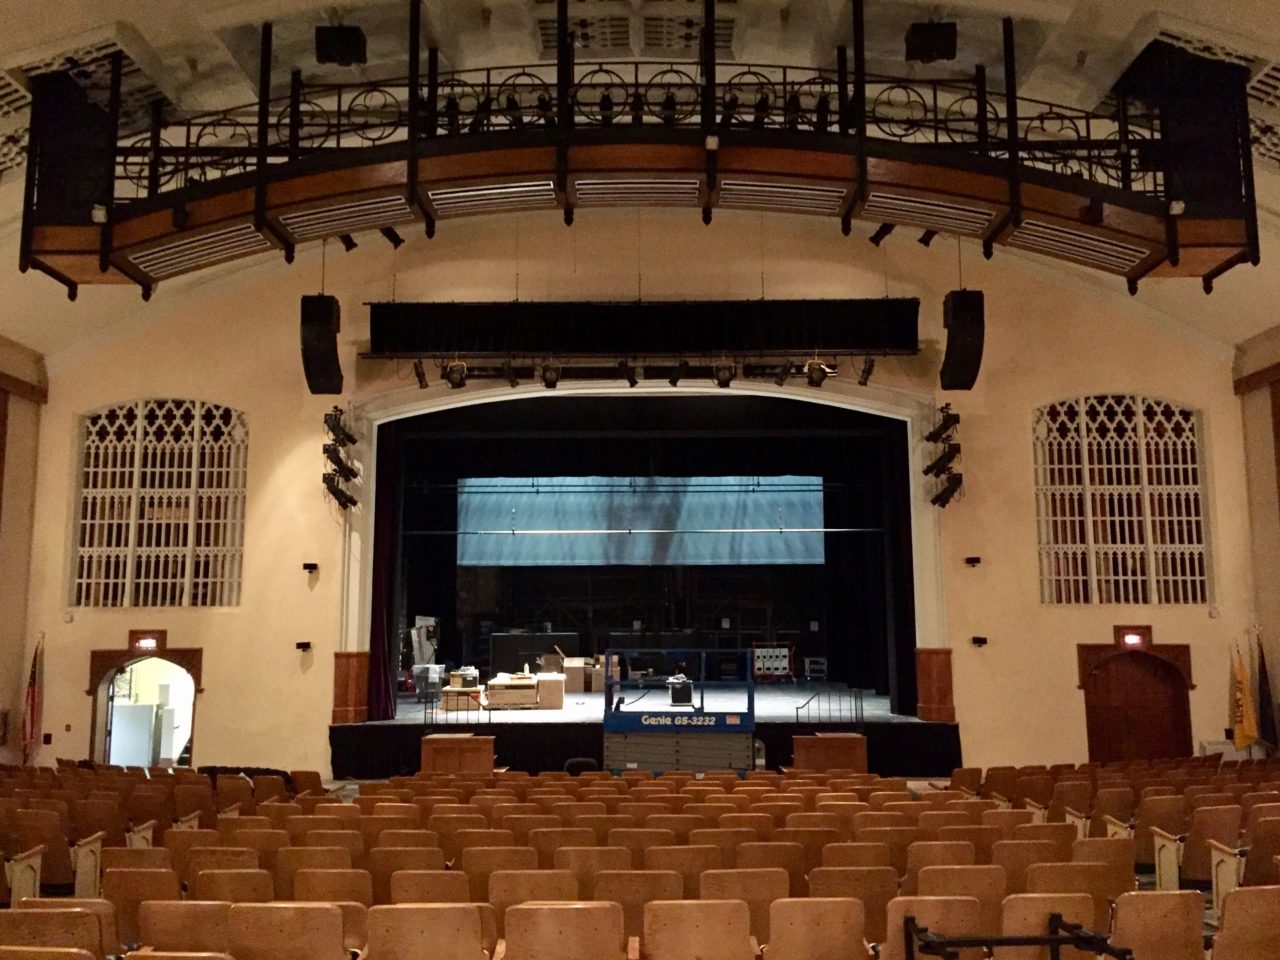 Asplundh Concert Hall at West Chester University Clear Sound